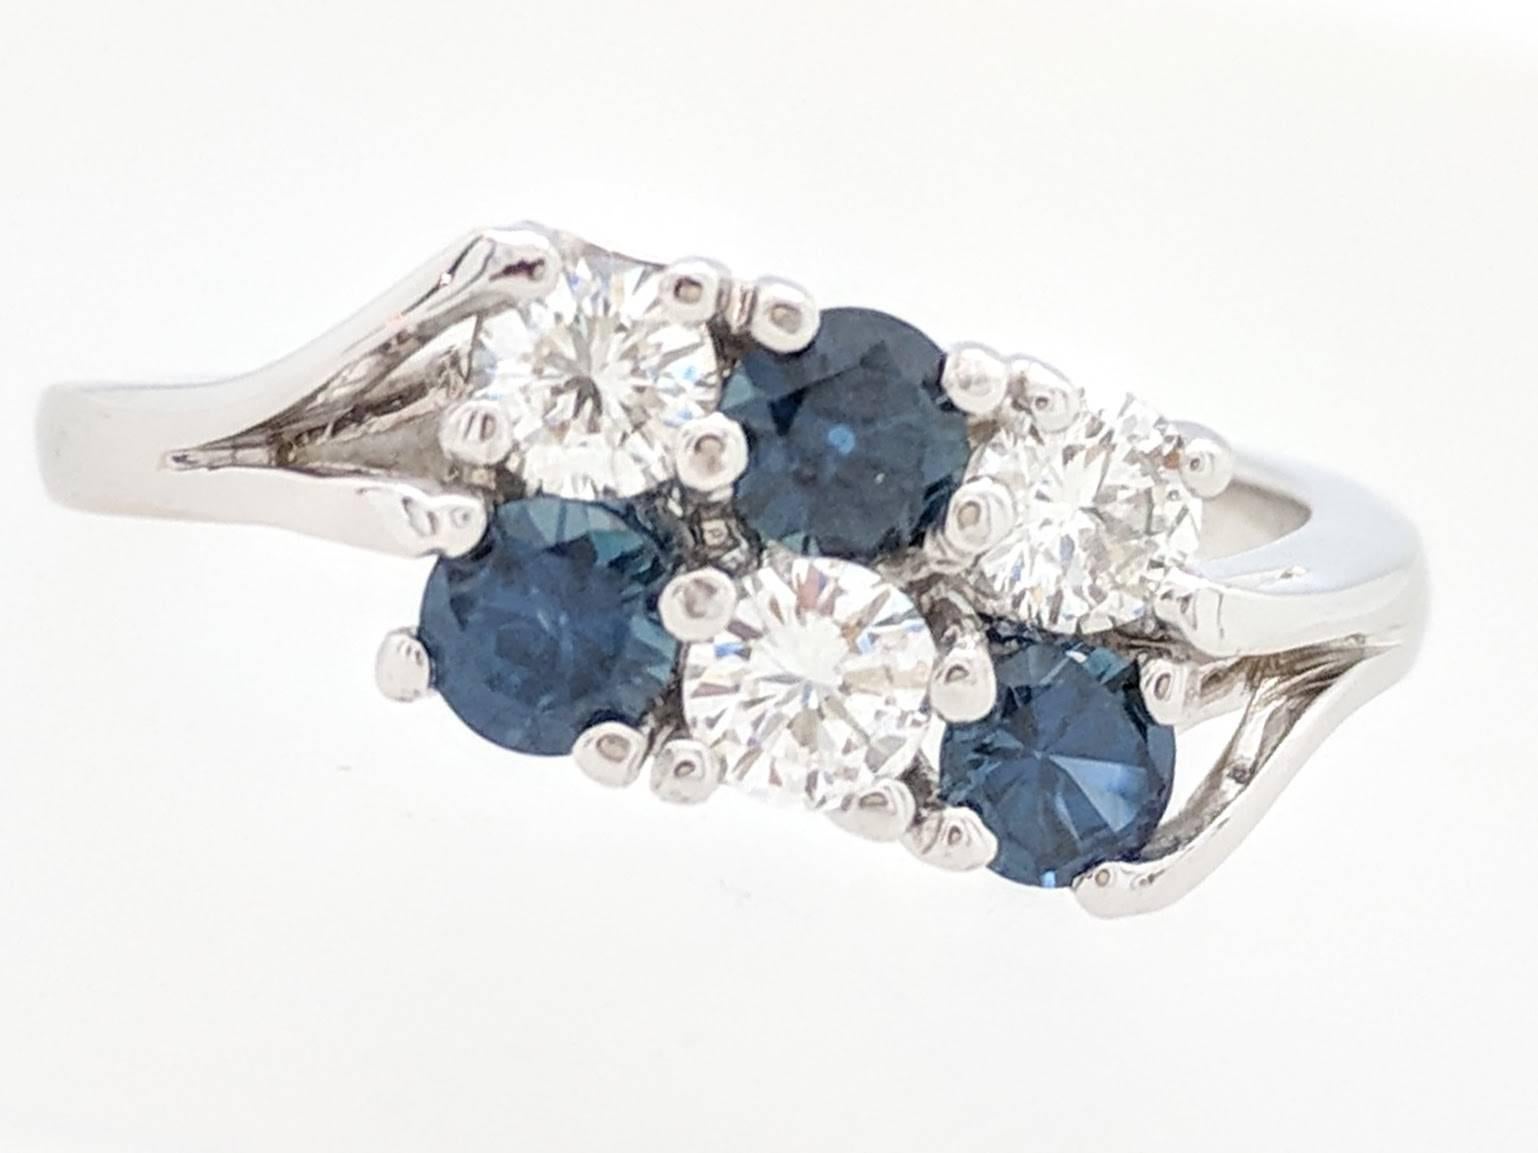 Ladies 14k White Gold 1.20ctw Diamond & Sapphire Ring Size 7

You are viewing a beautiful ladies diamond and sapphire ring.  This ring is crafted from 14k white gold and weighs 3.4 grams.  It features (3) .20ct natural round diamonds and (3) .20ct